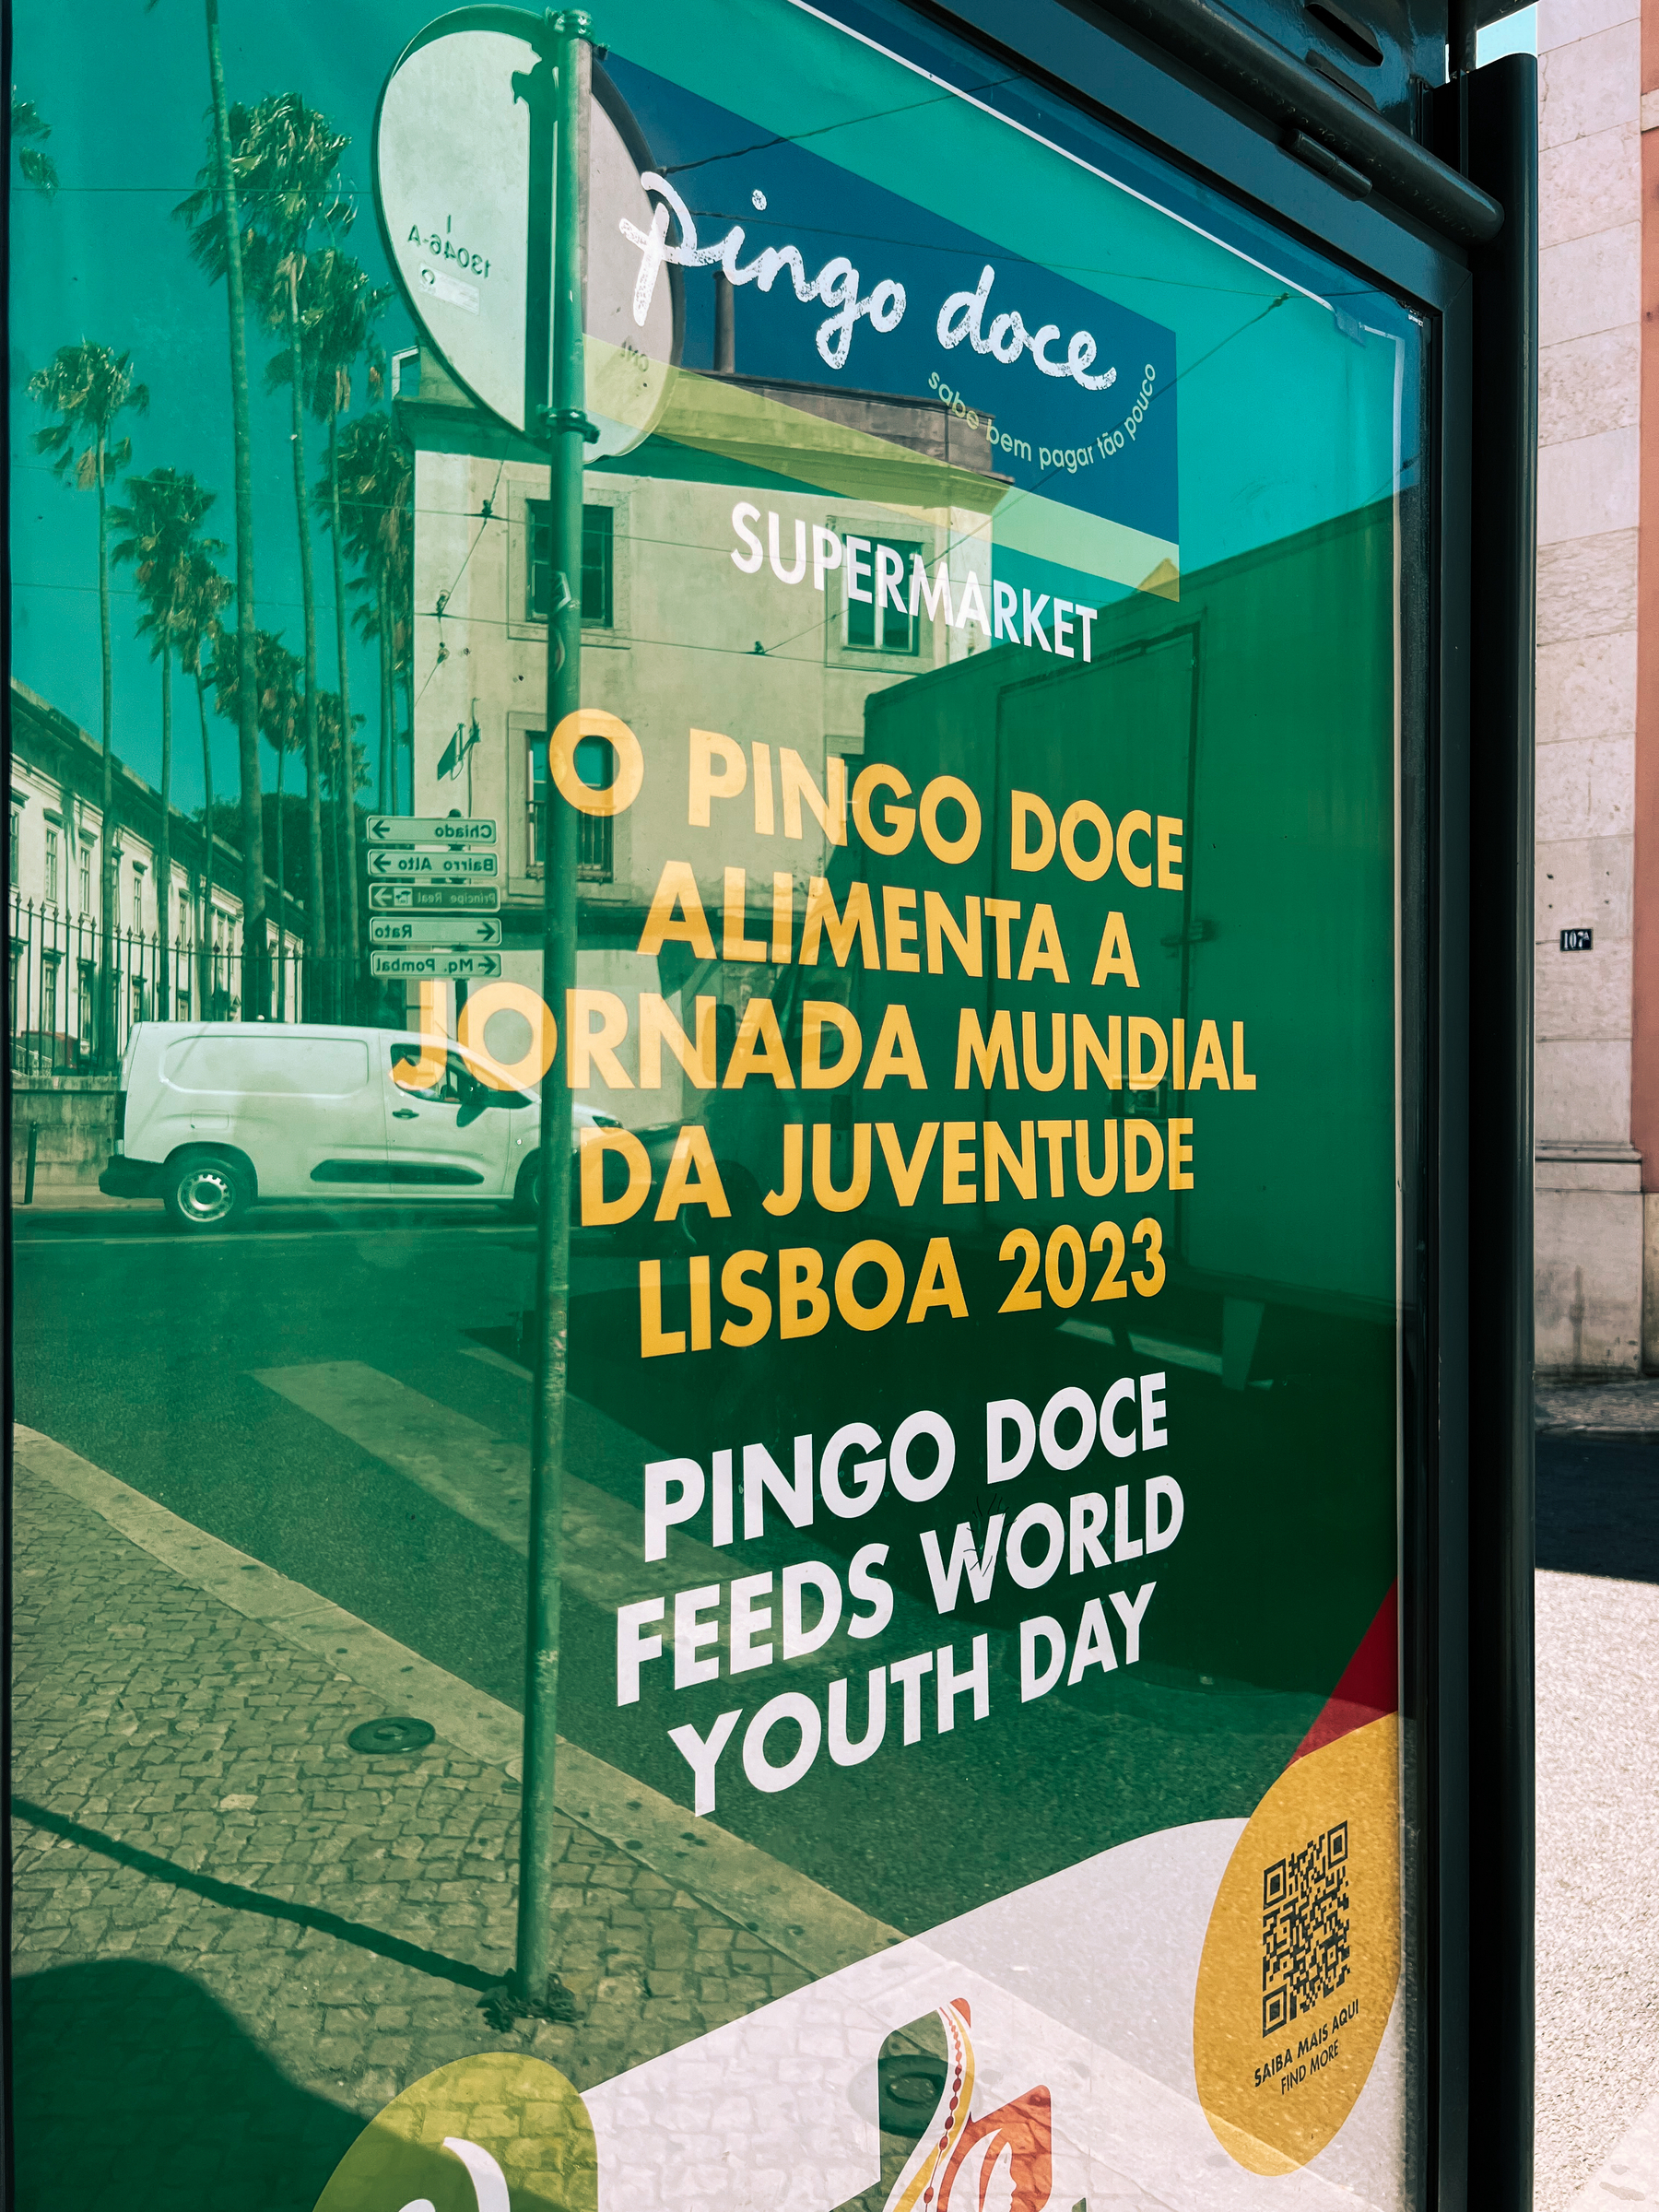 Ad with “Pingo Doce feeds world youth day”. 